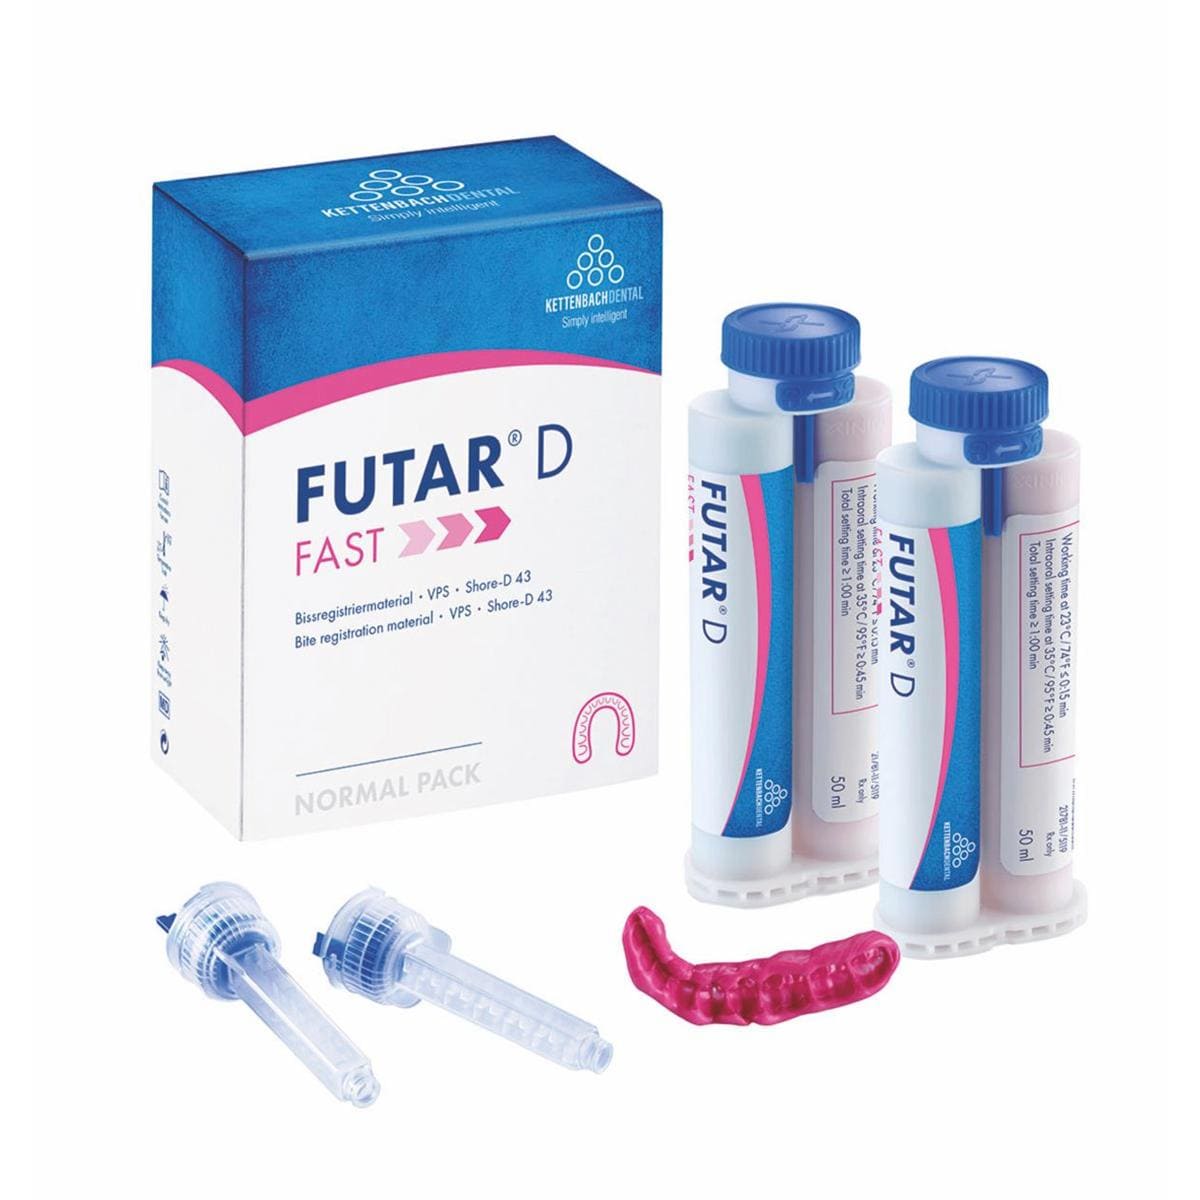 Futar D Fast Normal pack